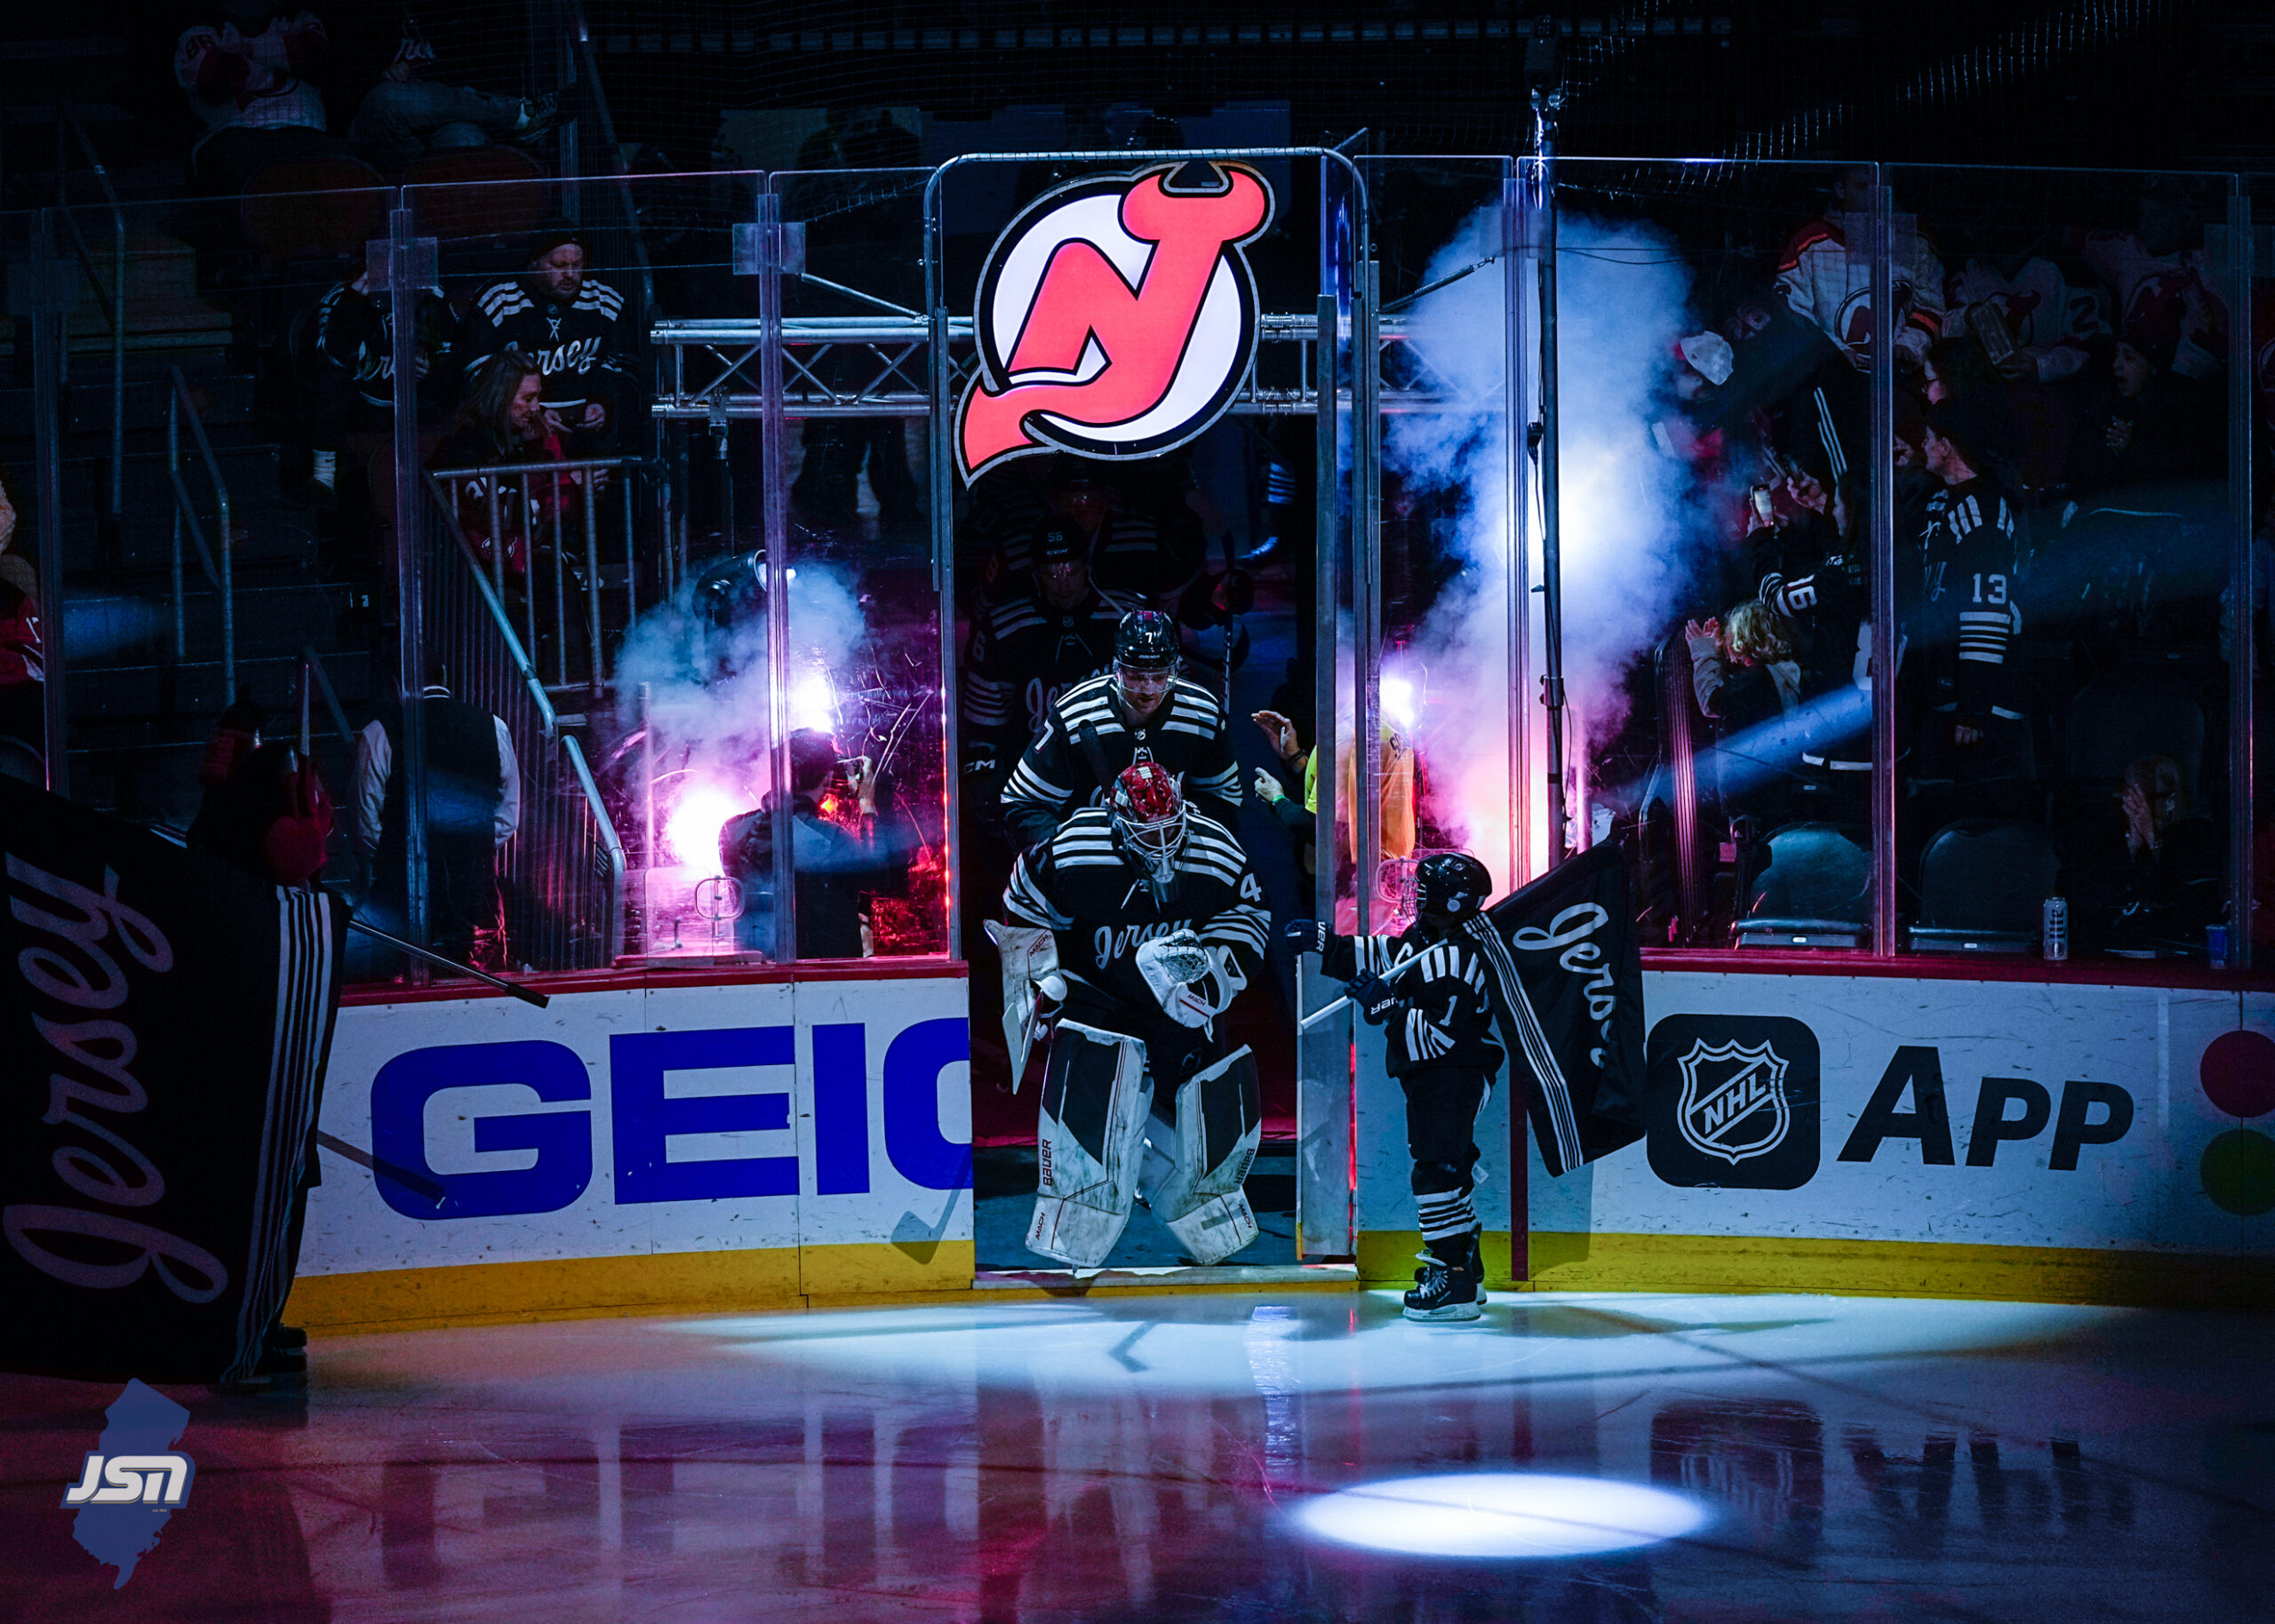 New Jersey Devils: It's time to bring back the green jerseys full-time